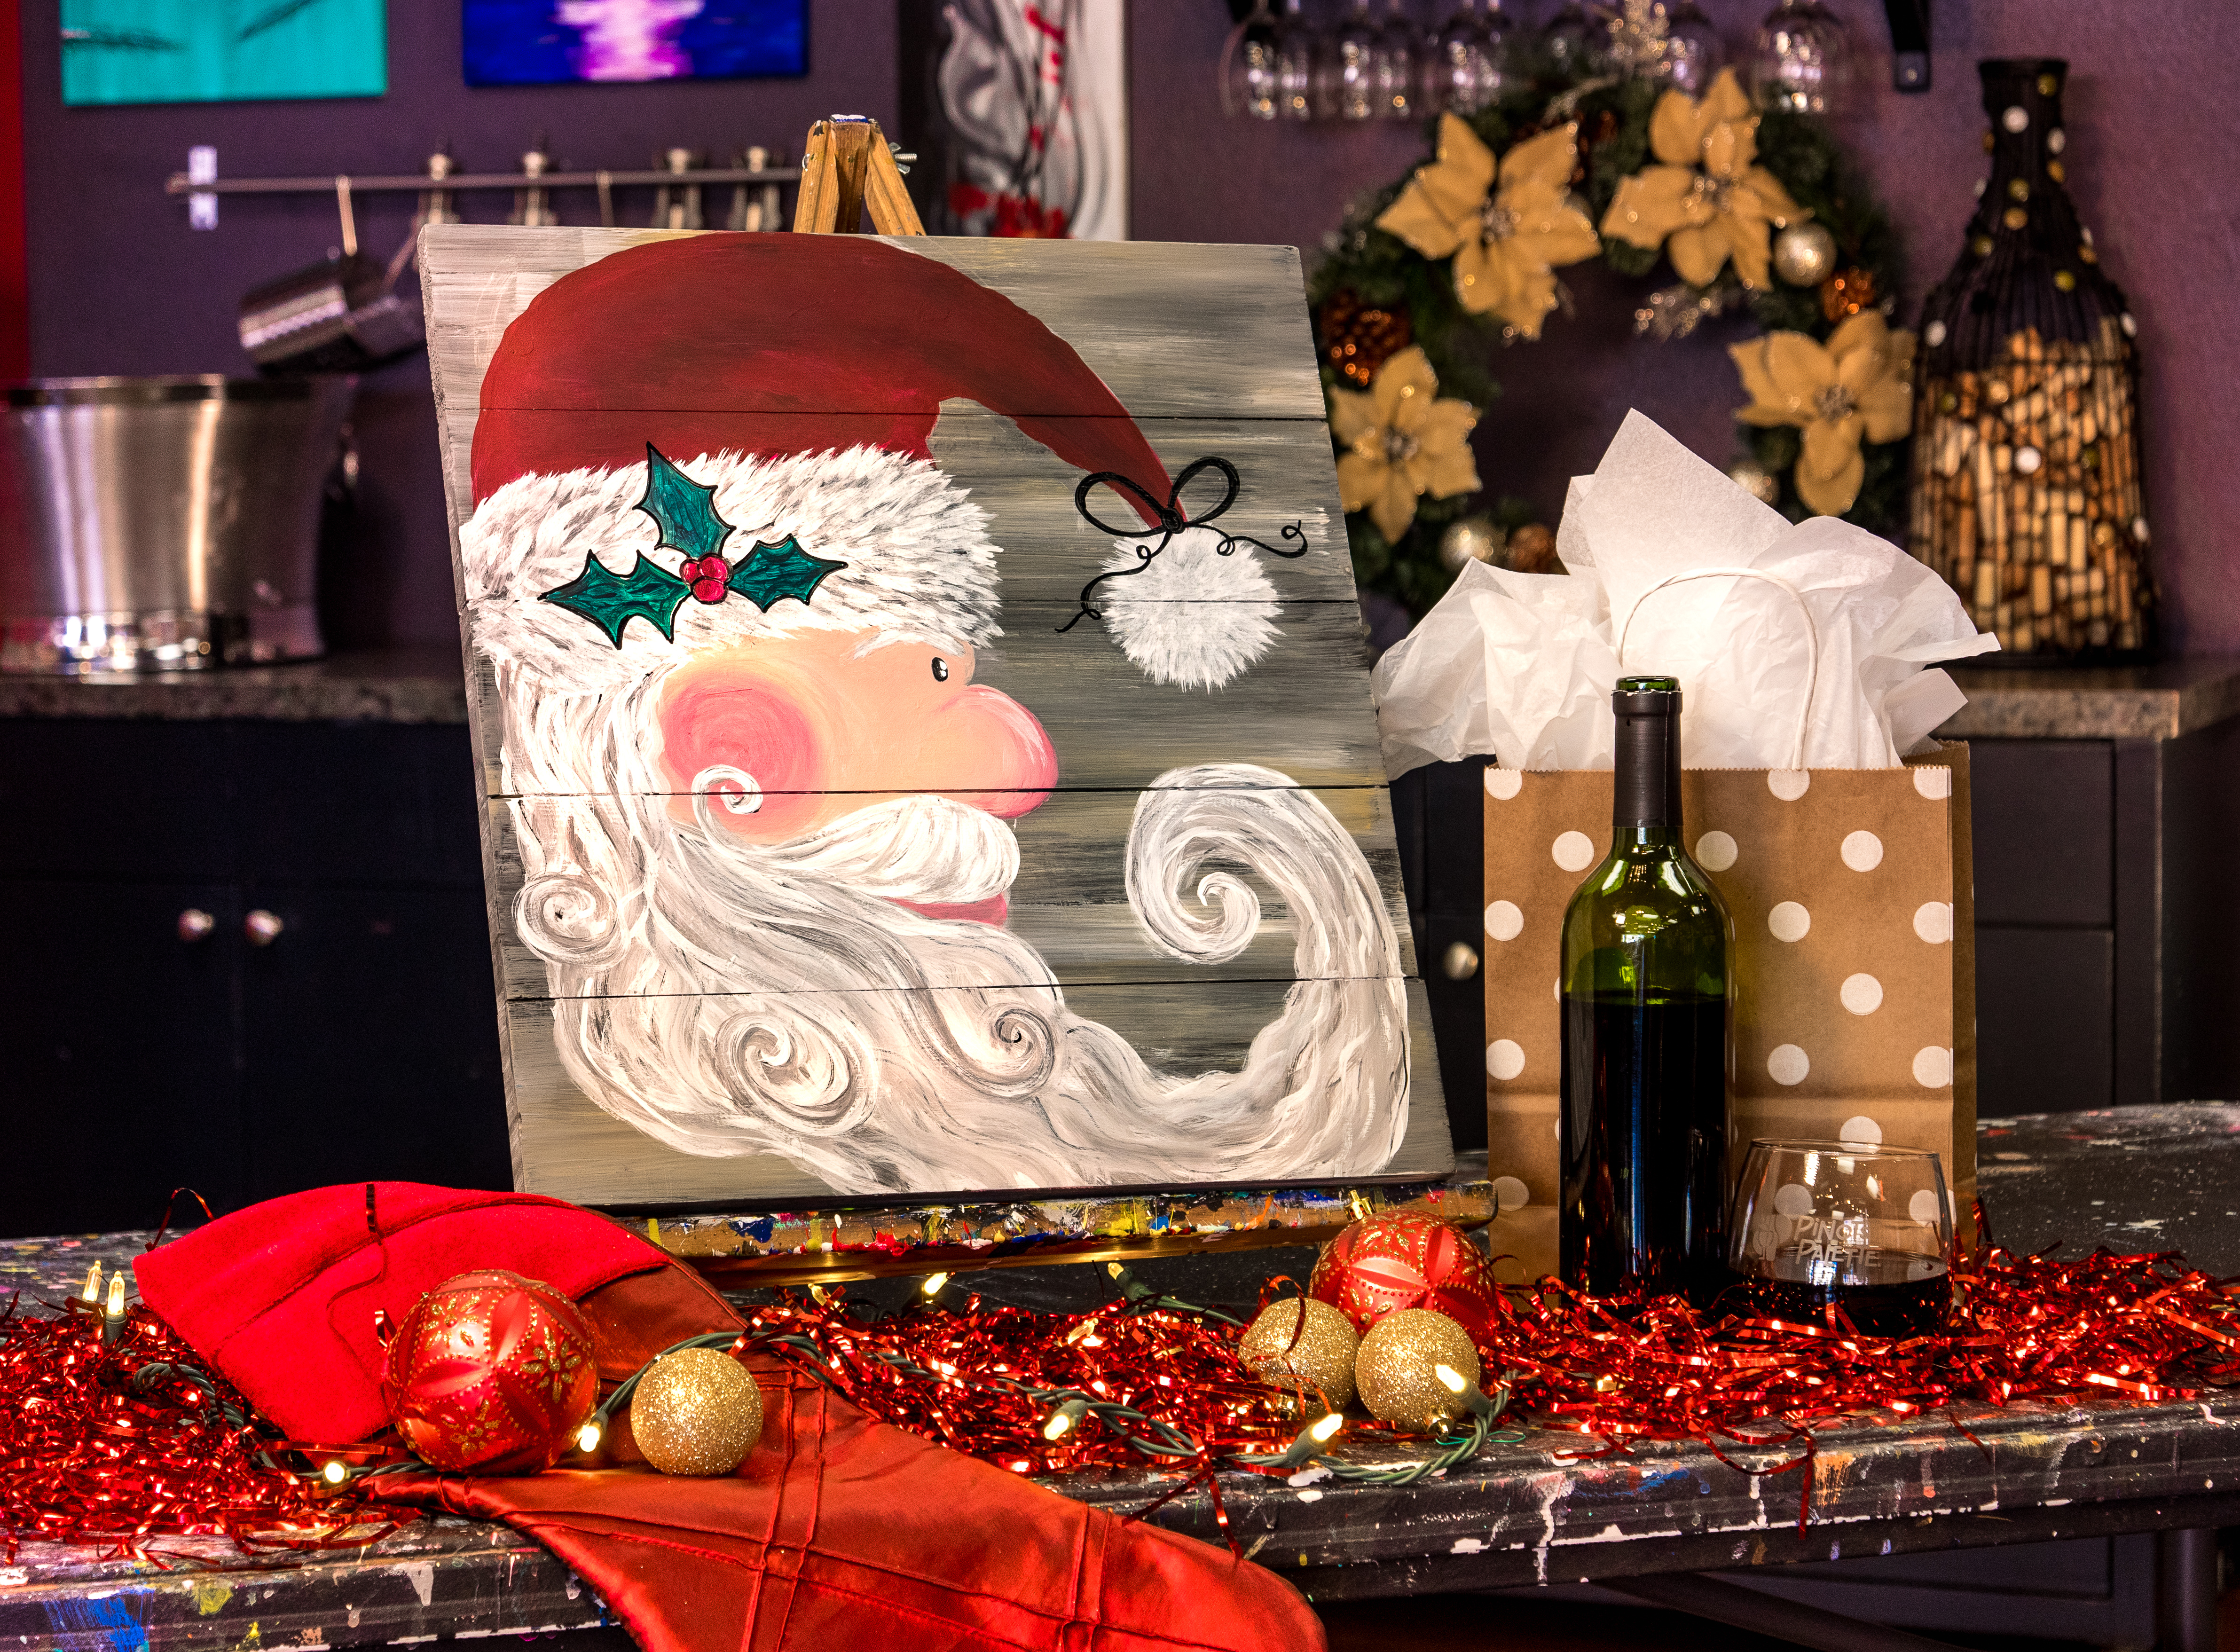 7 Reasons to Have Your Holiday Party at Pinot’s Palette